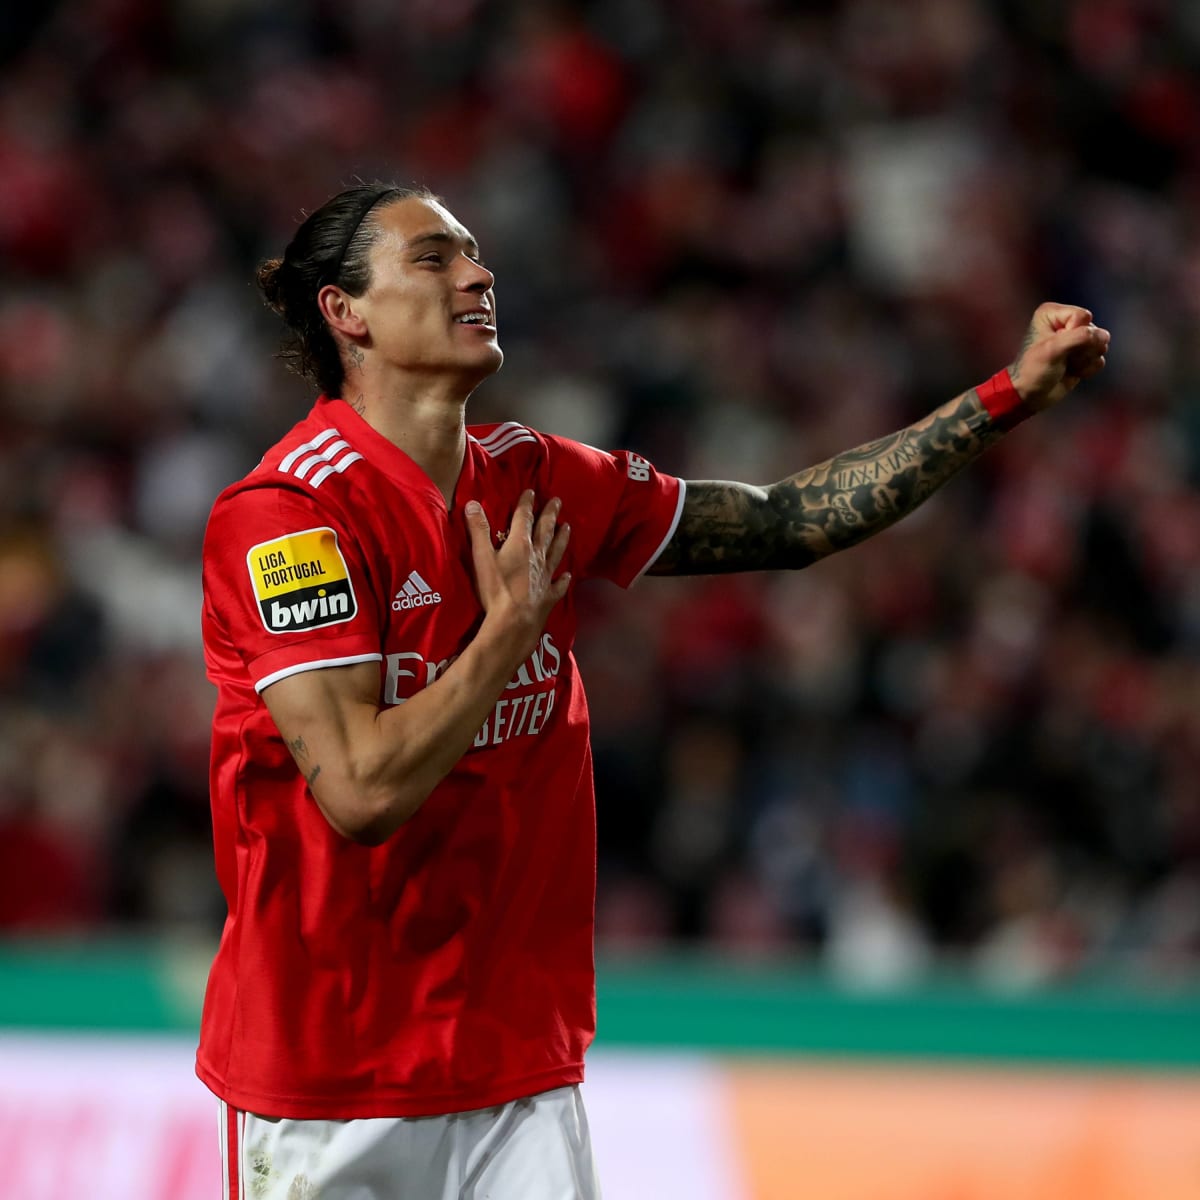 Report: Manchester United Are Favourites To Sign £125million Benfica Star Striker Darwin Nunez Illustrated Manchester United News, Analysis and More